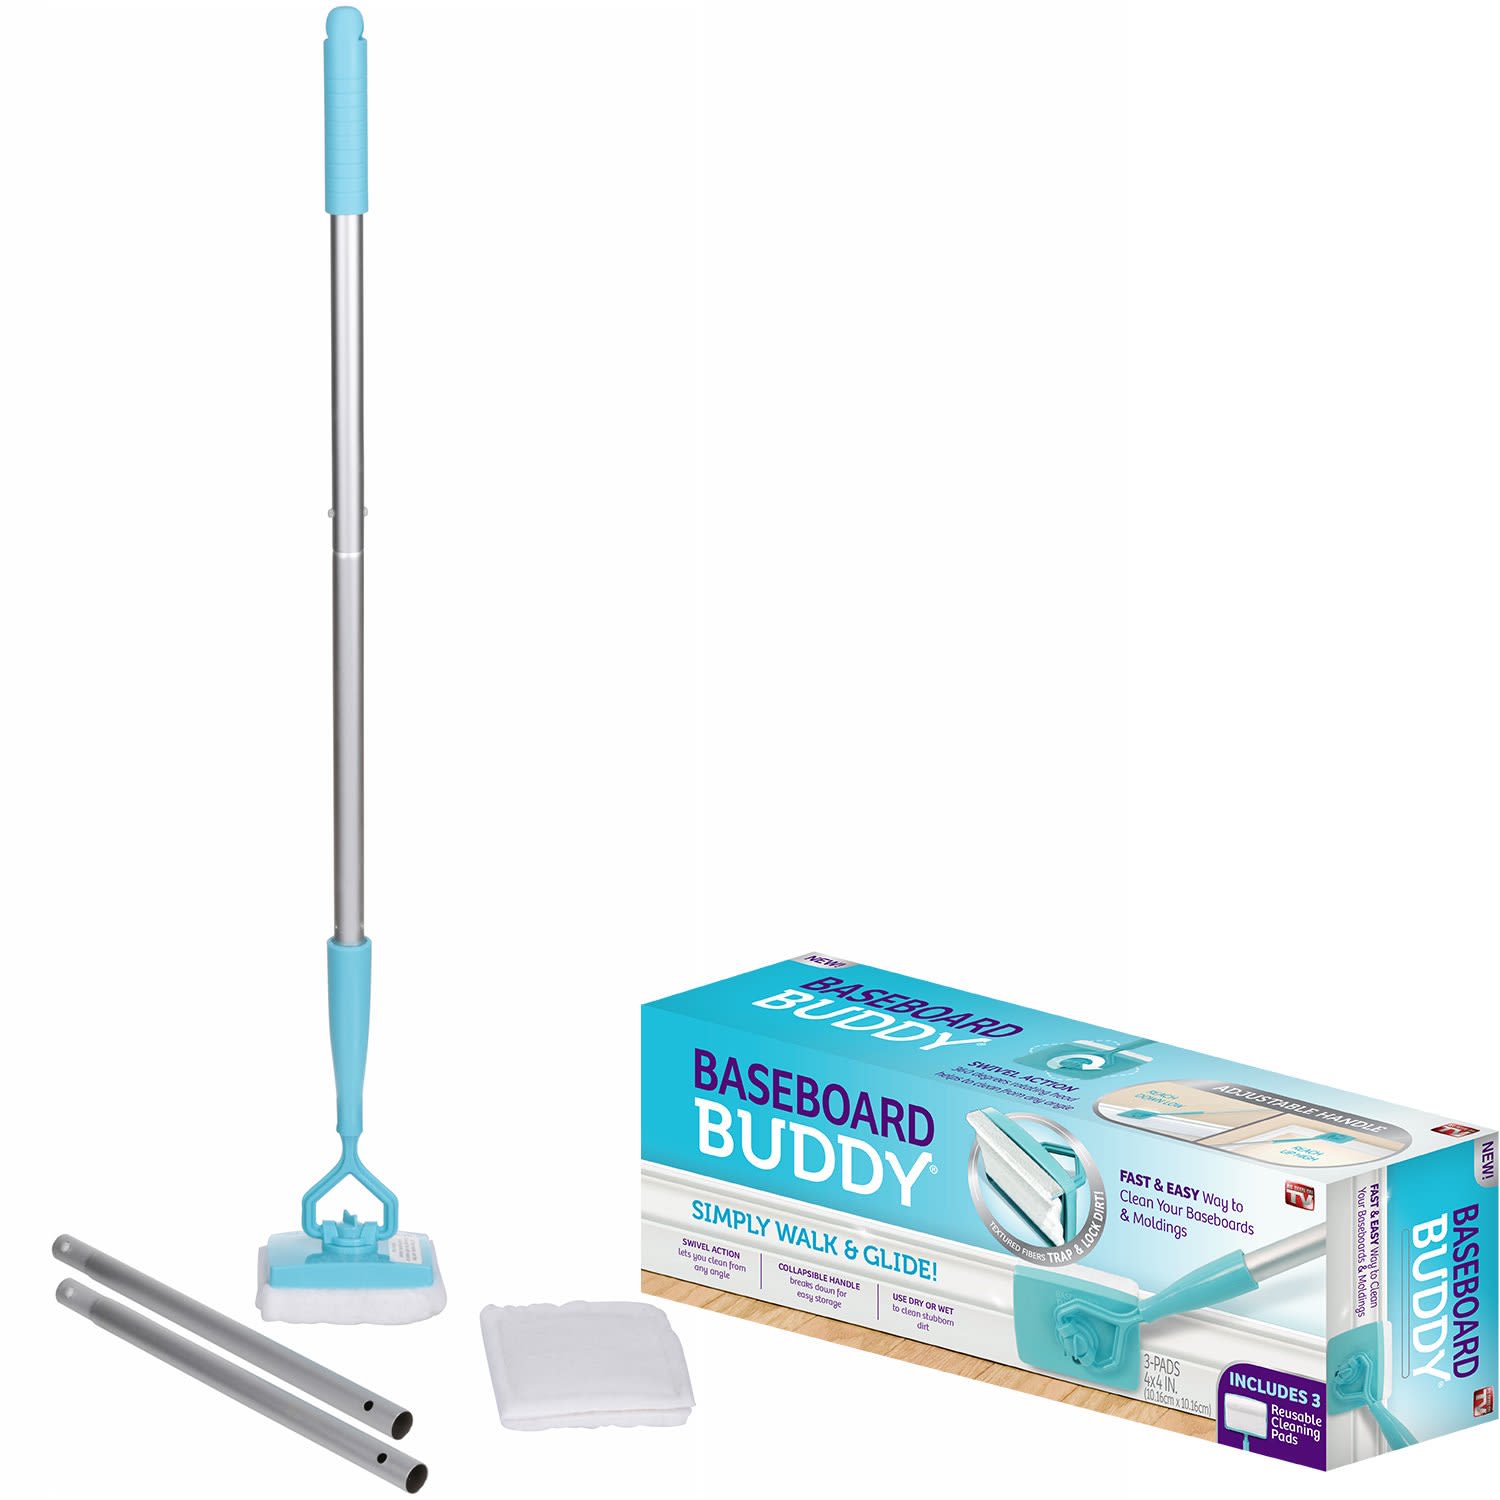 Baseboard Buddy Review: Does it Work? 